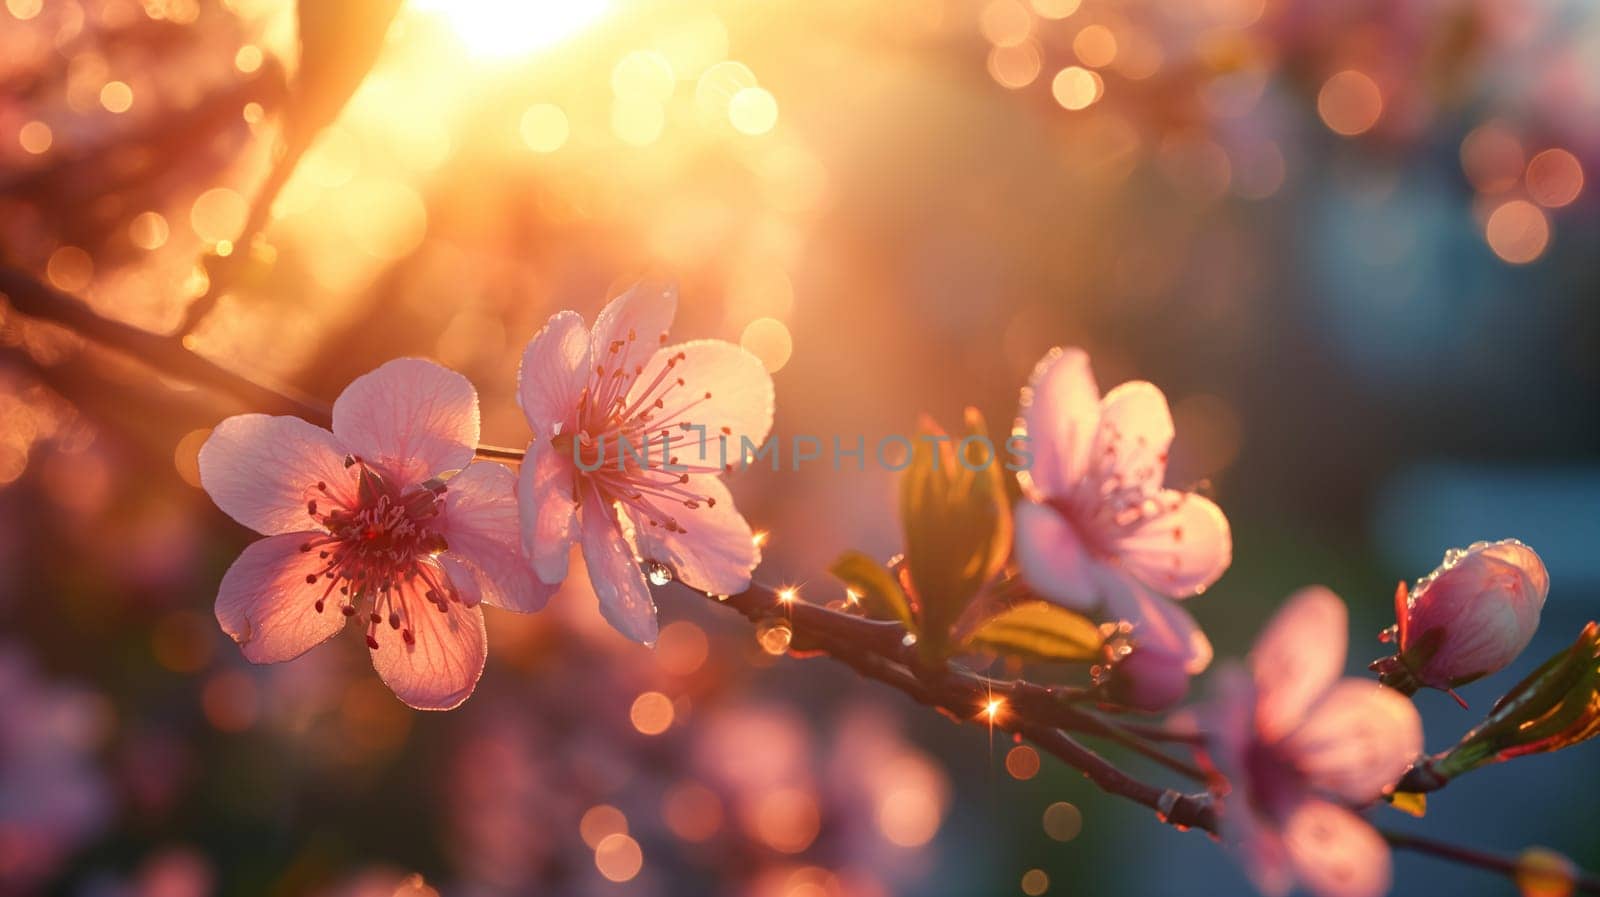 Golden Hour Blossoms in Springtime by chrisroll